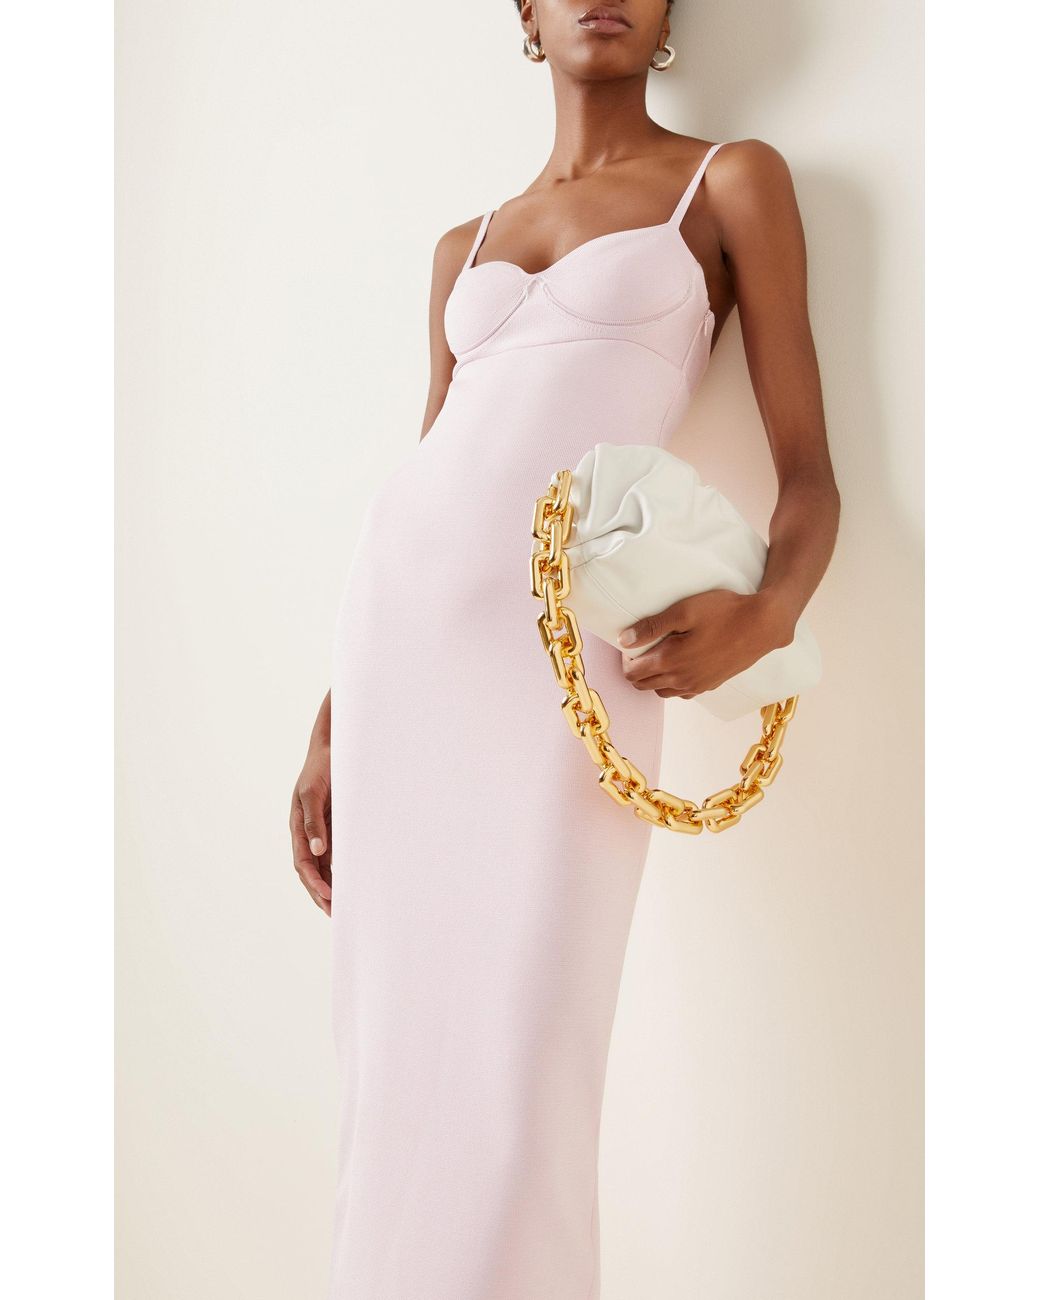 Brandon Maxwell Knit Bustier Gown in Pink